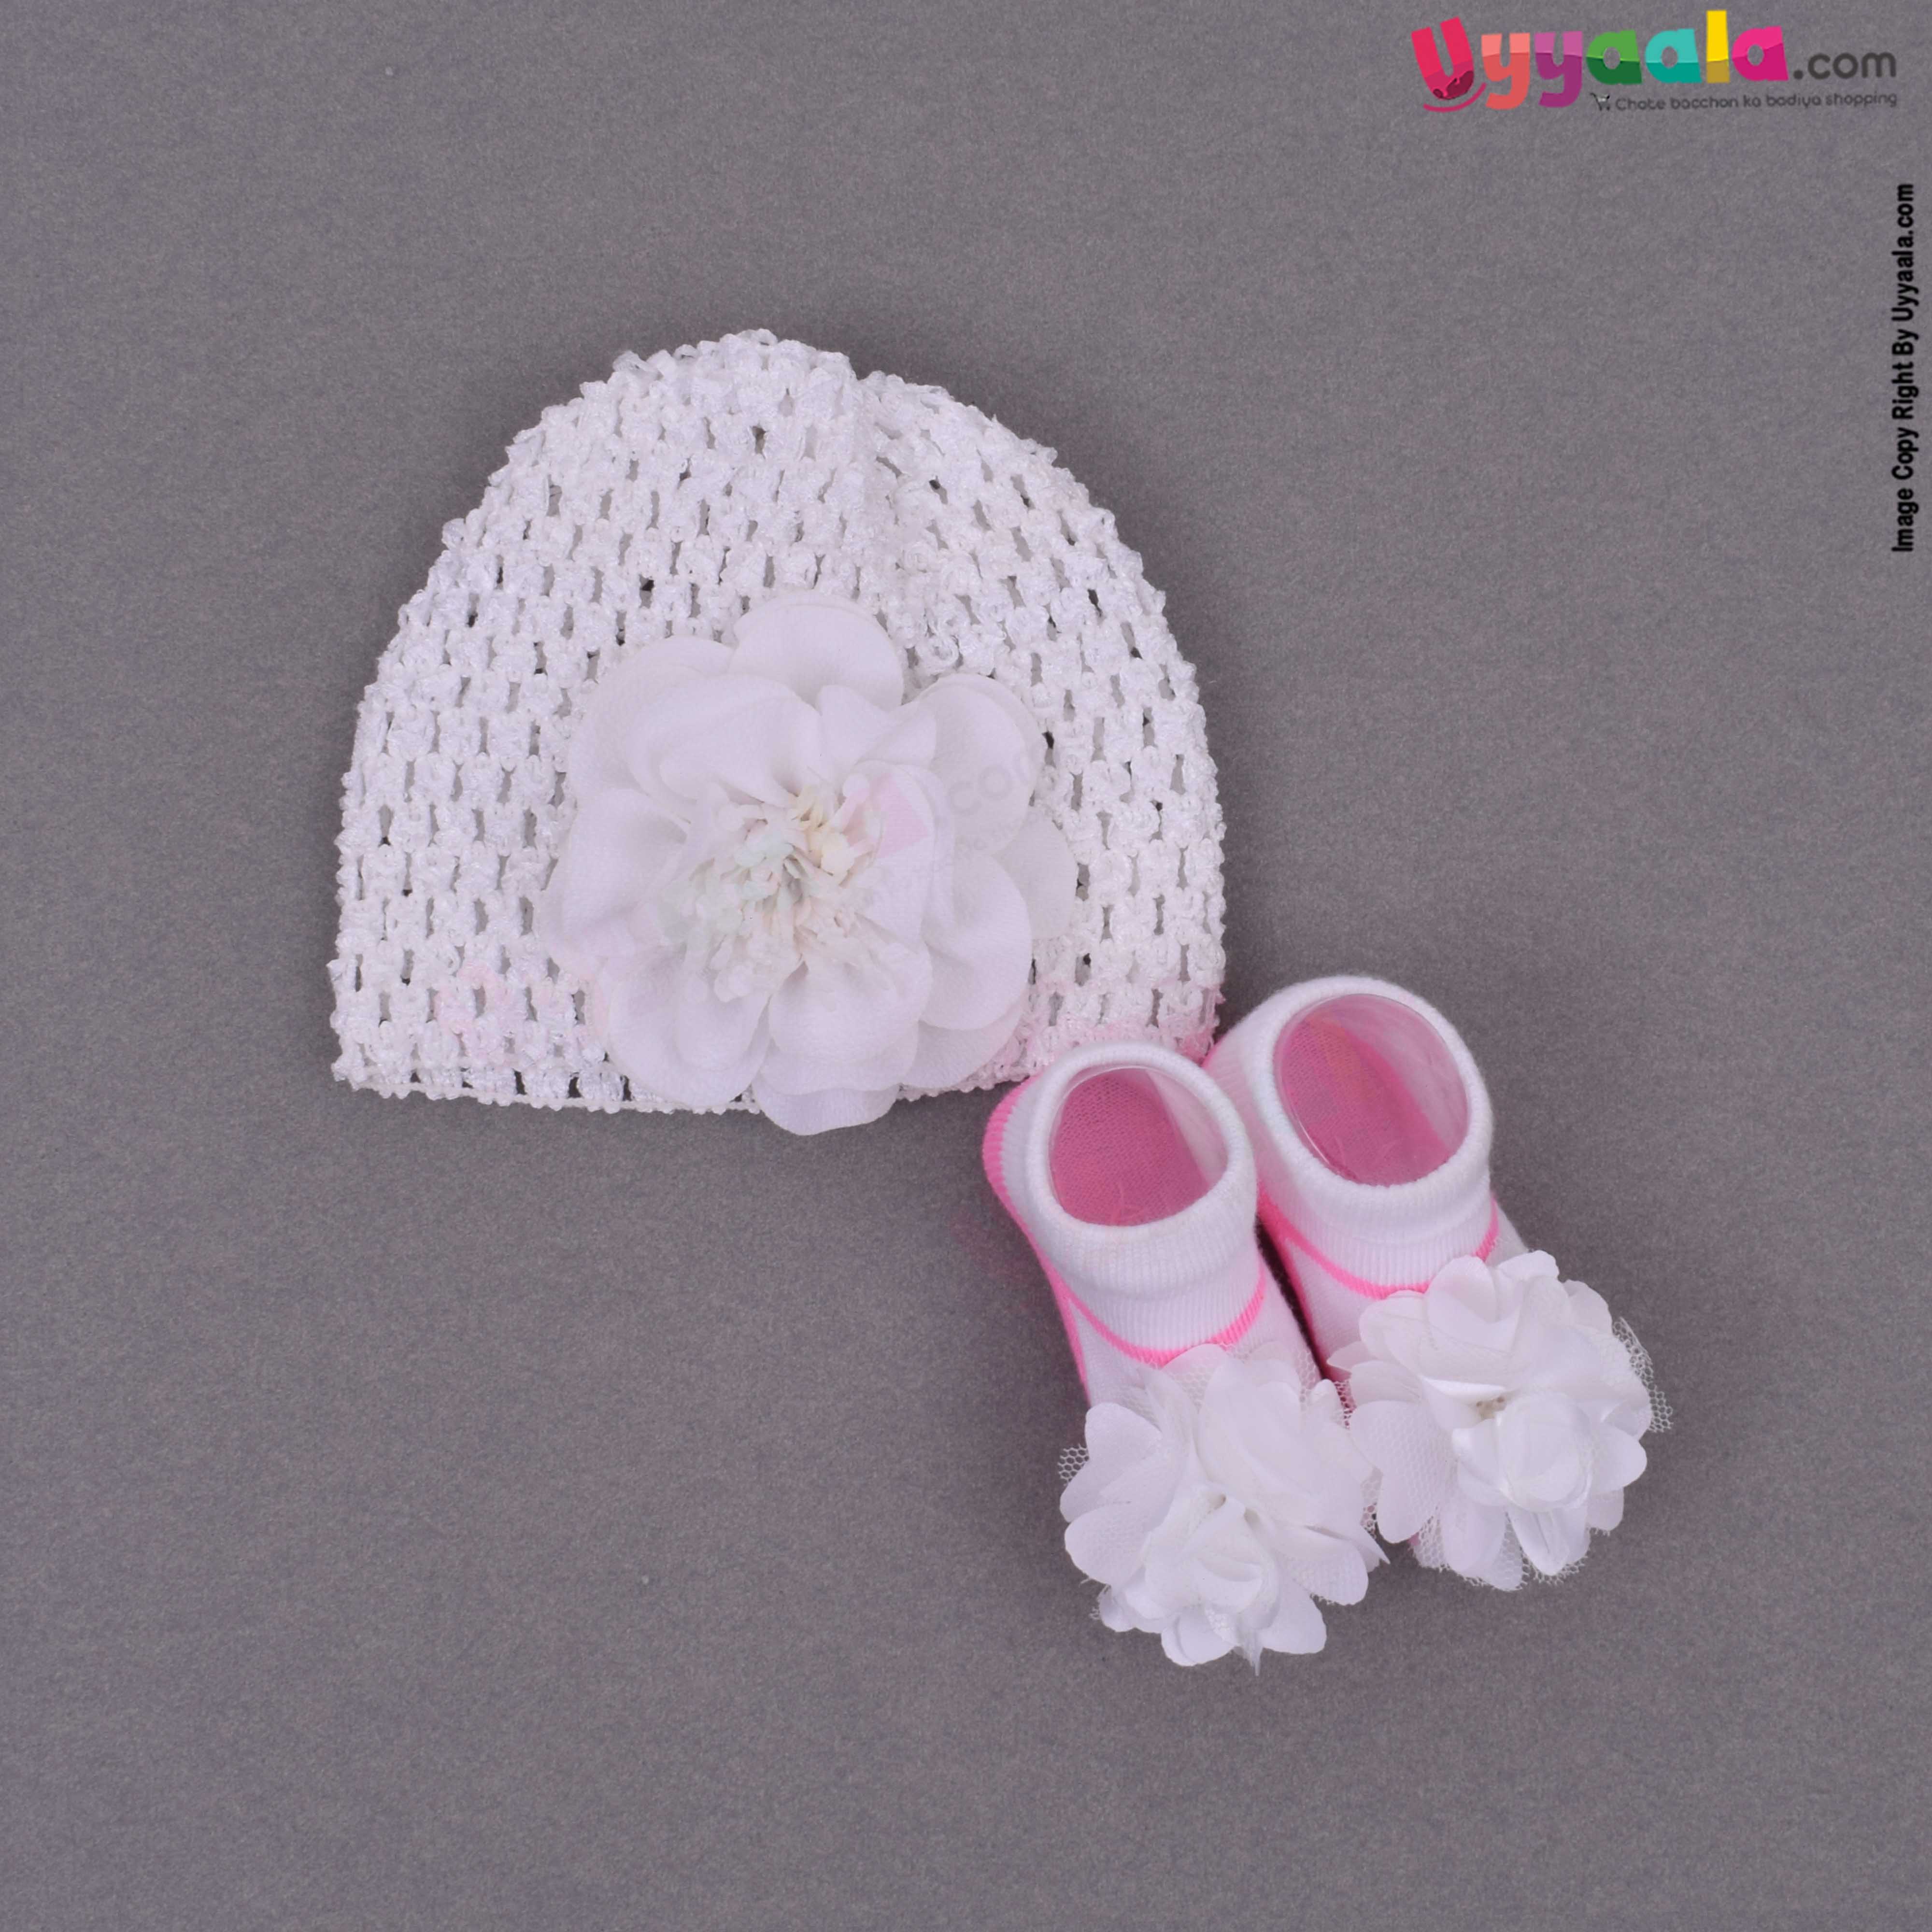 SHINY BABY Accessory set for kids with cap and socks - white